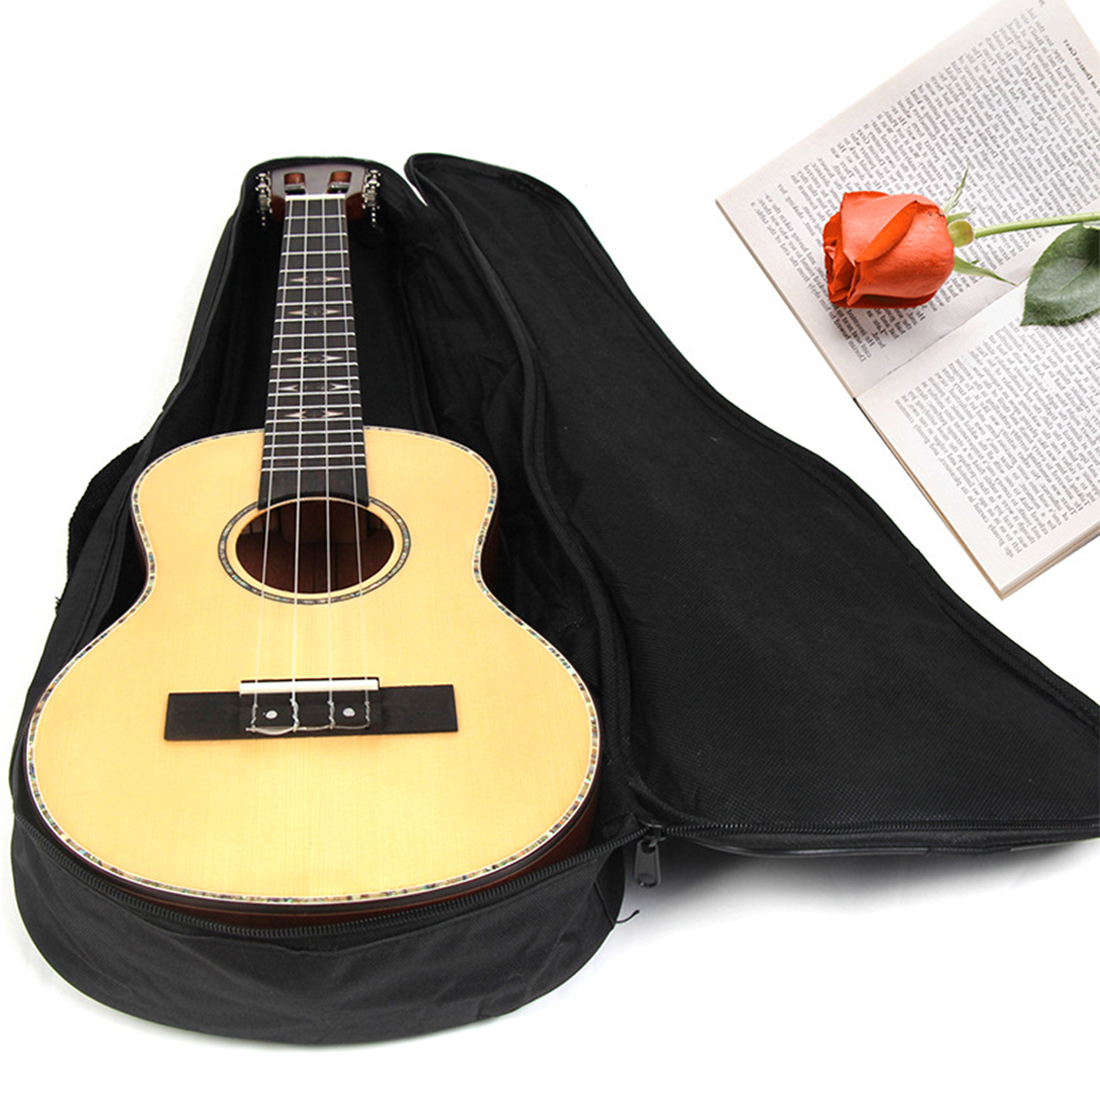 New 21"23"26" Inches Ukulele Padded Bag Gig Bag Guitar Bag Case For Acoustic Guitar Musical Instruments Guitar Parts Accessories